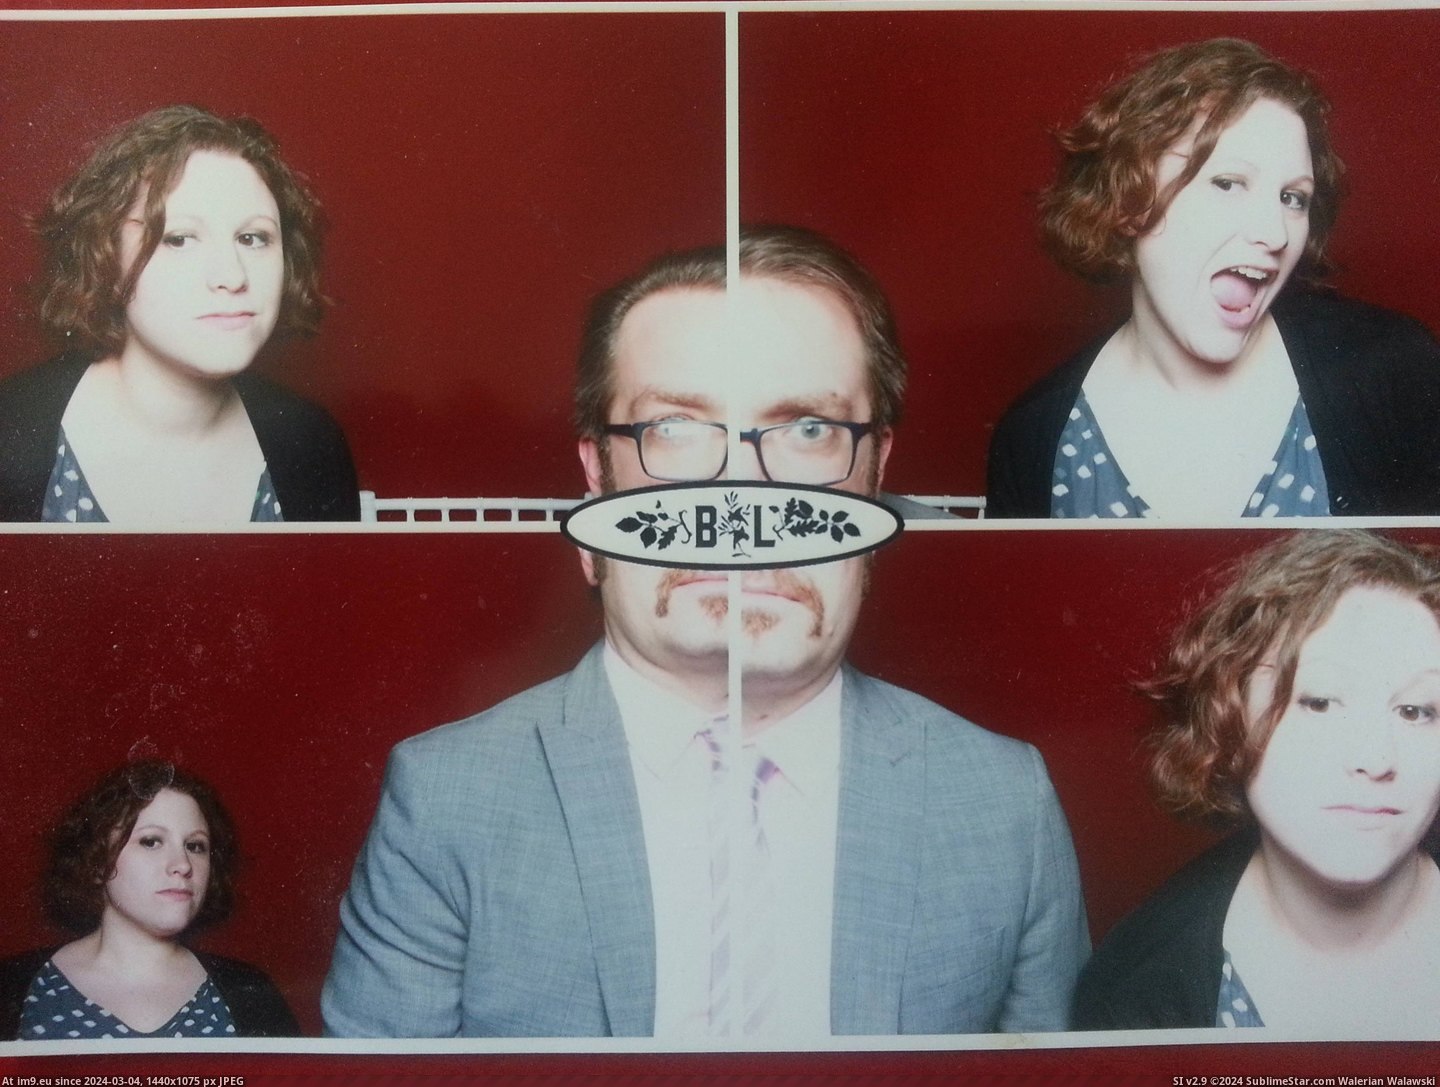 #Series #Wedding #Photobooth #Code #Cracked [Pics] There was a photobooth at a wedding that took a series of four. I cracked the code. Pic. (Bild von album My r/PICS favs))